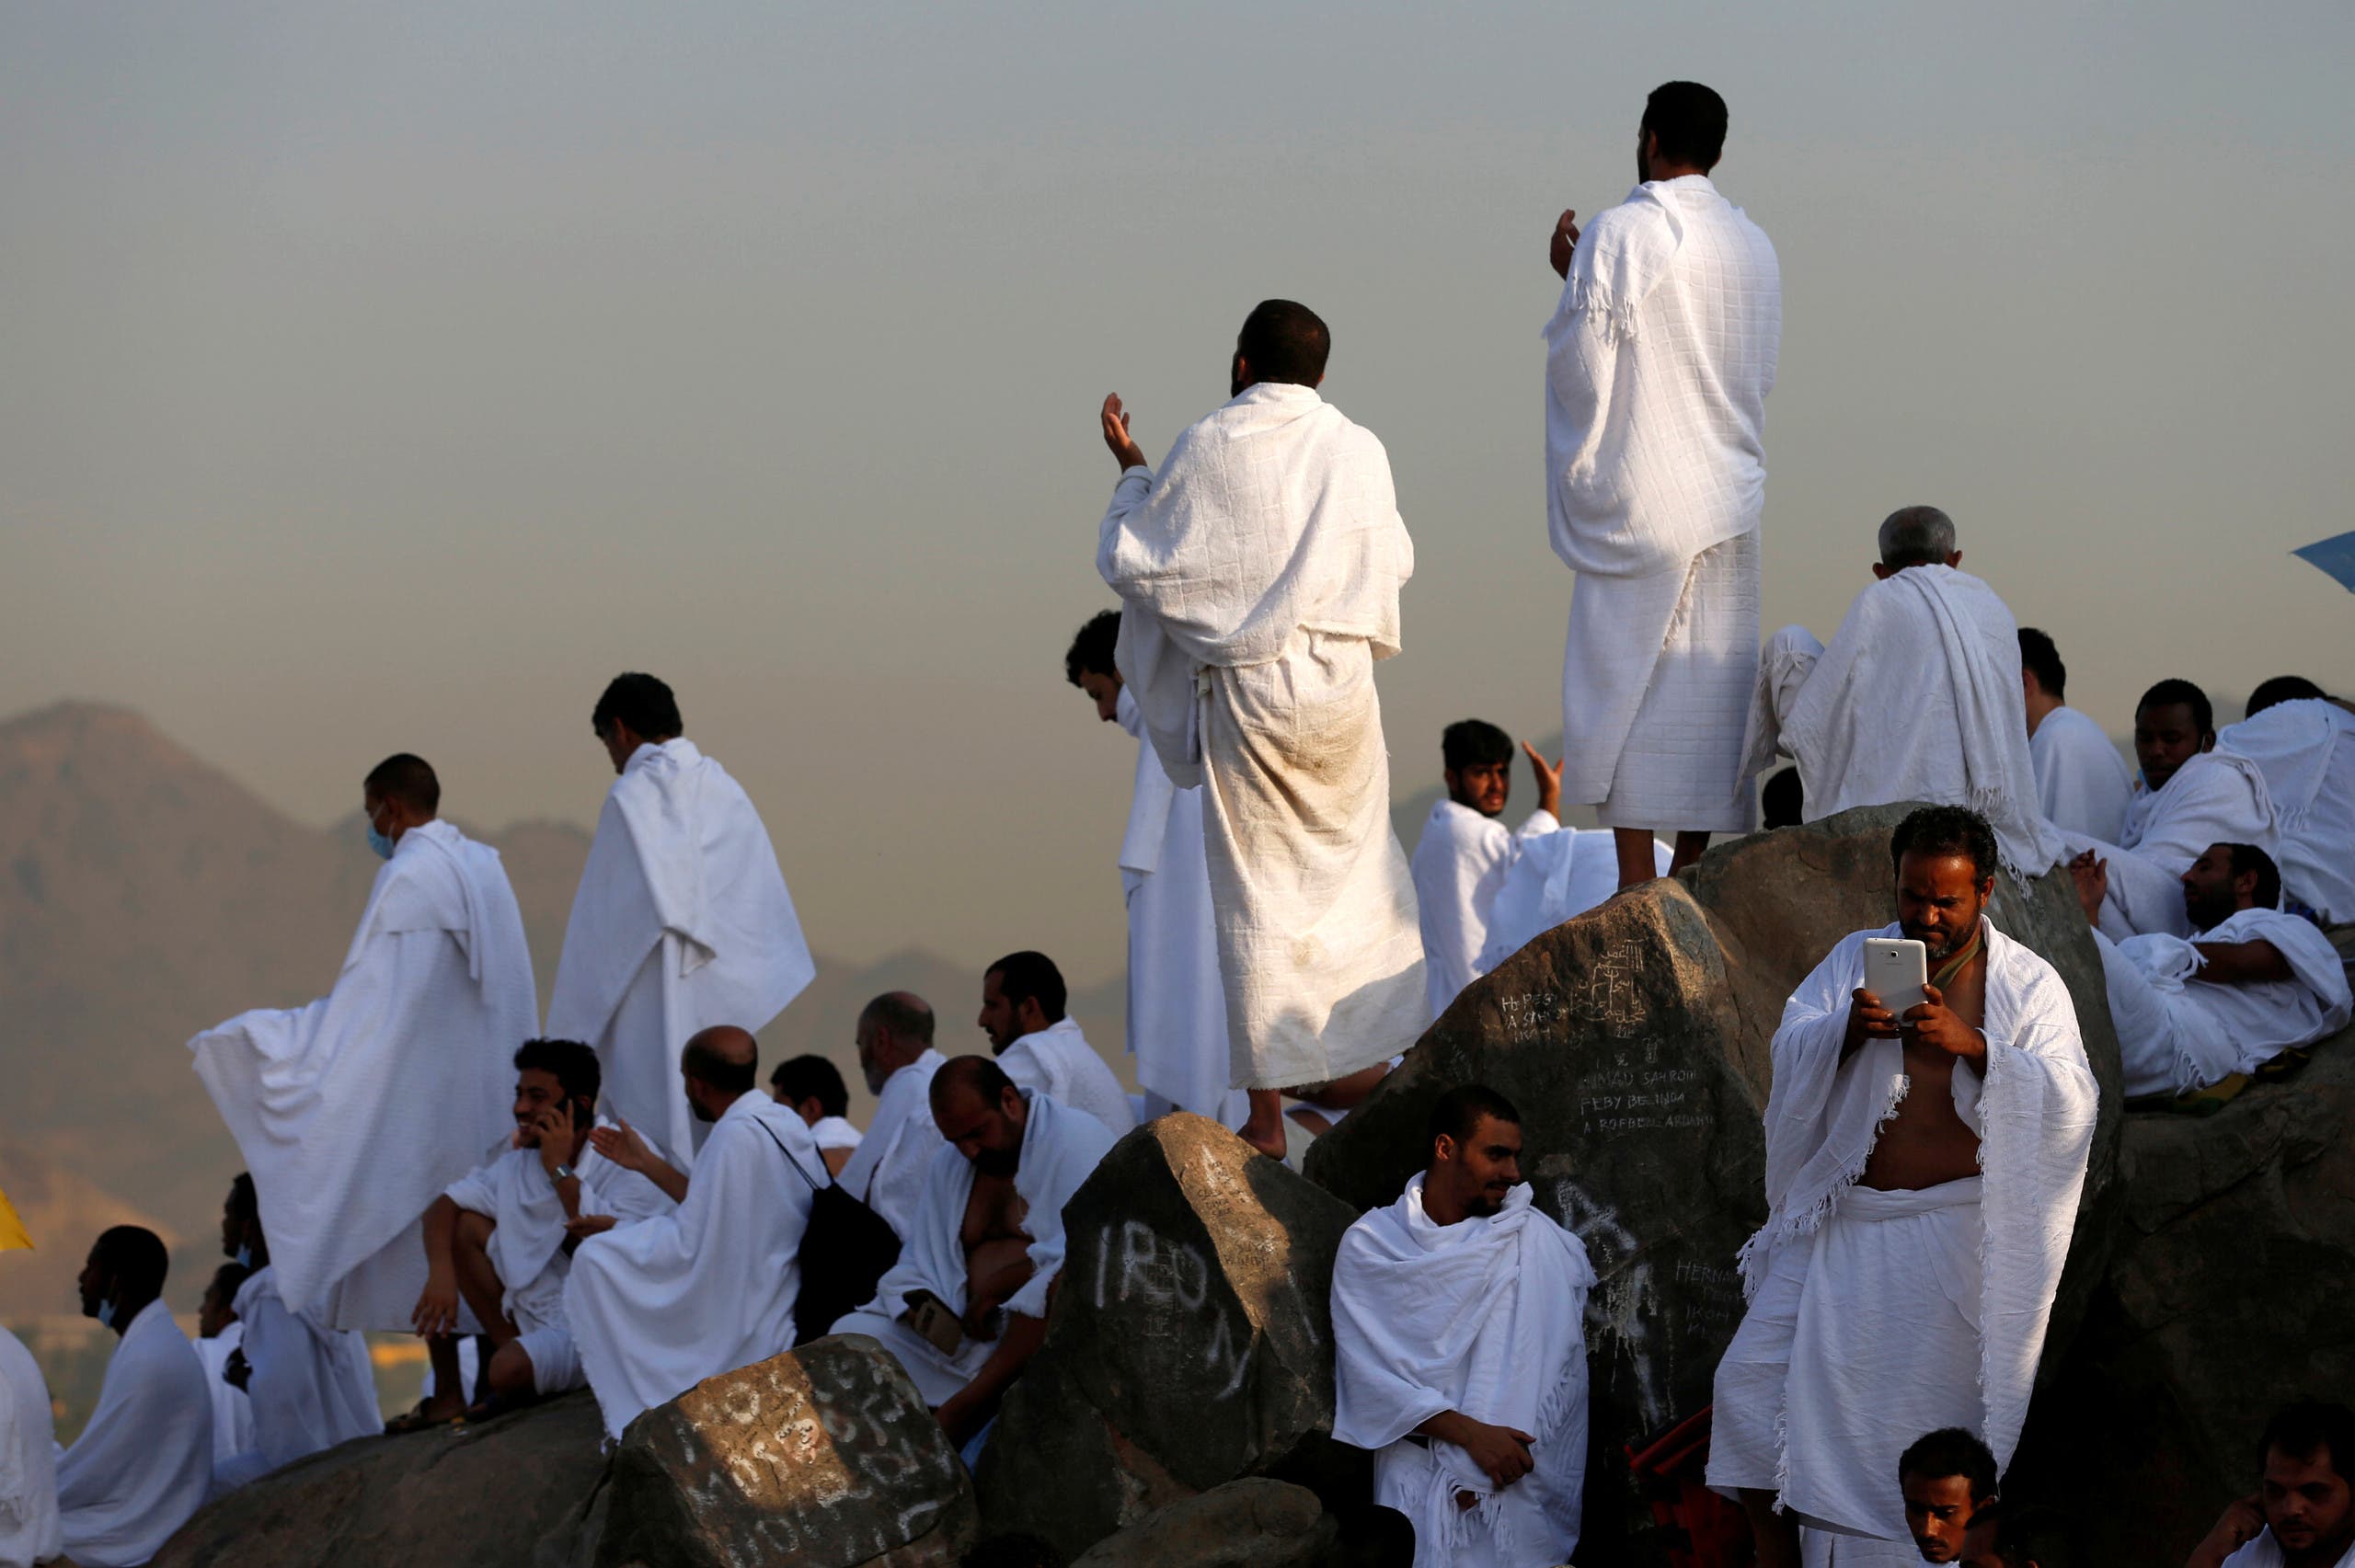 Muslim pilgrims gather on Mount Mercy on the plains of Arafat during the annual haj pilgrimage, outside the holy city of Mecca, Saudi Arabia September 11, 2016. REUTERS/Ahmed Jadallah 